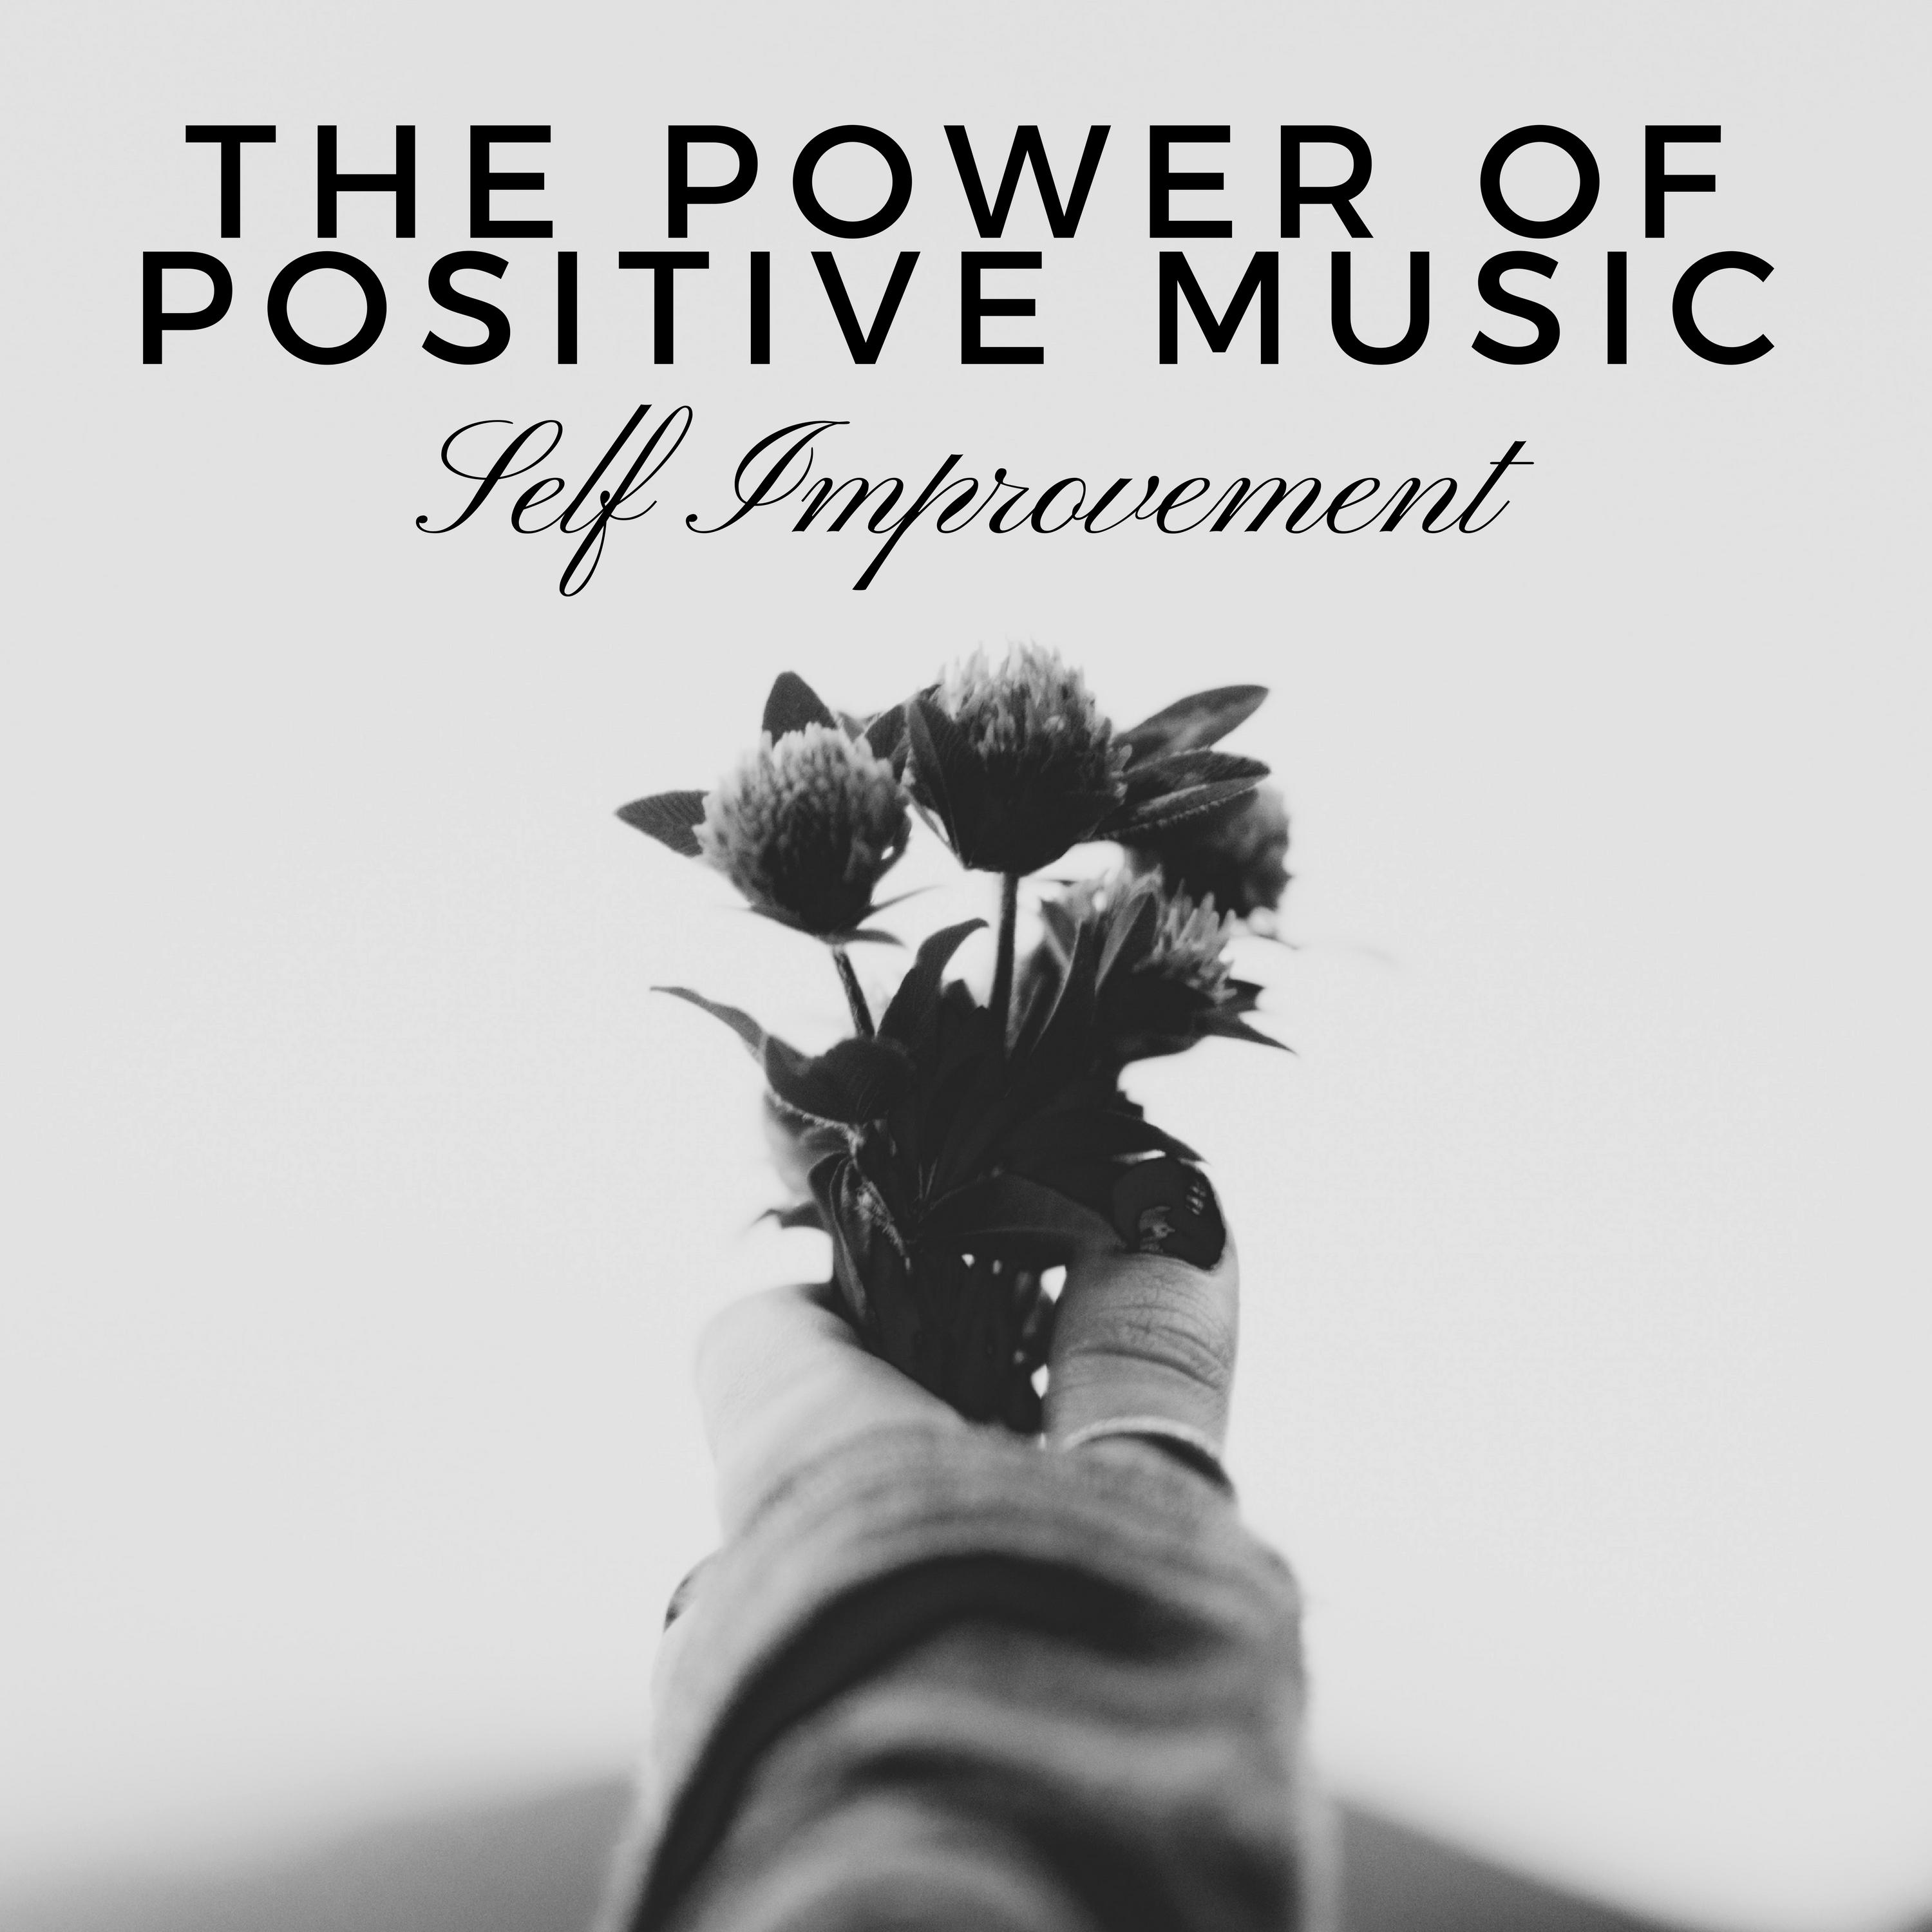 The Power of Positive Music